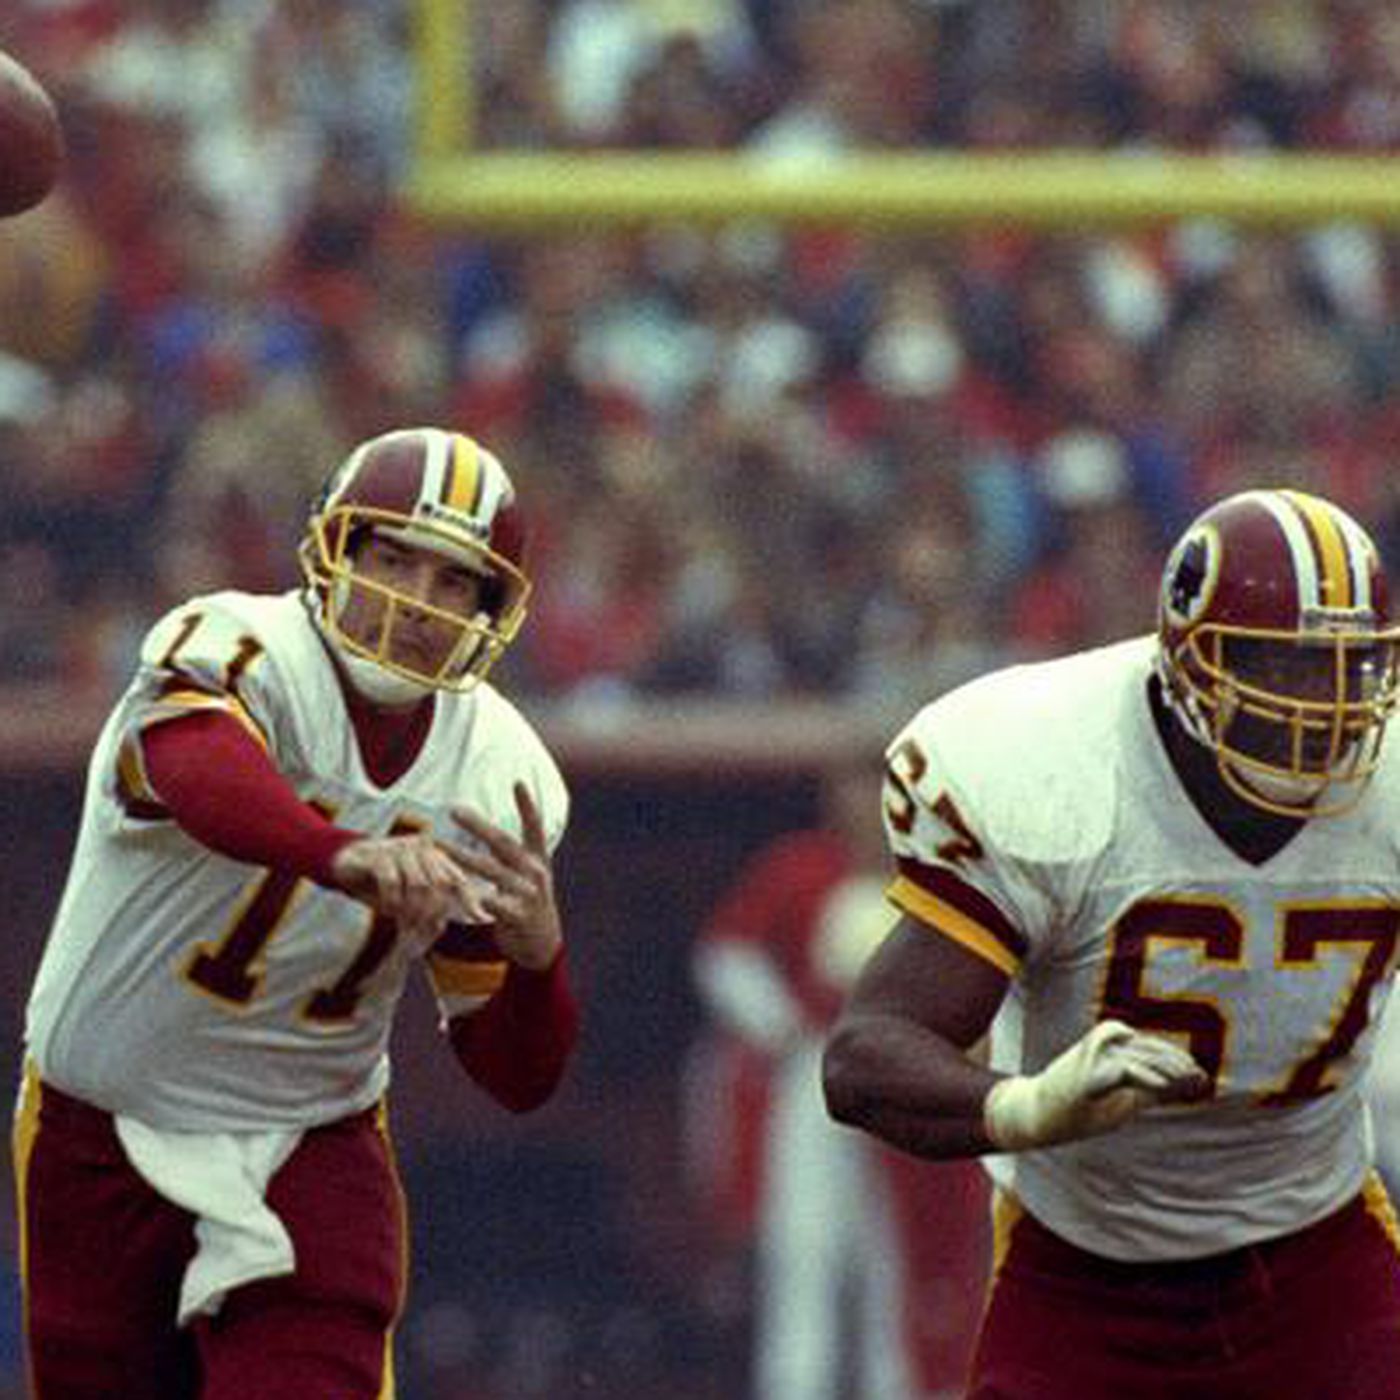 Mark Rypien to be Inducted into the Redskins Ring of Fame this